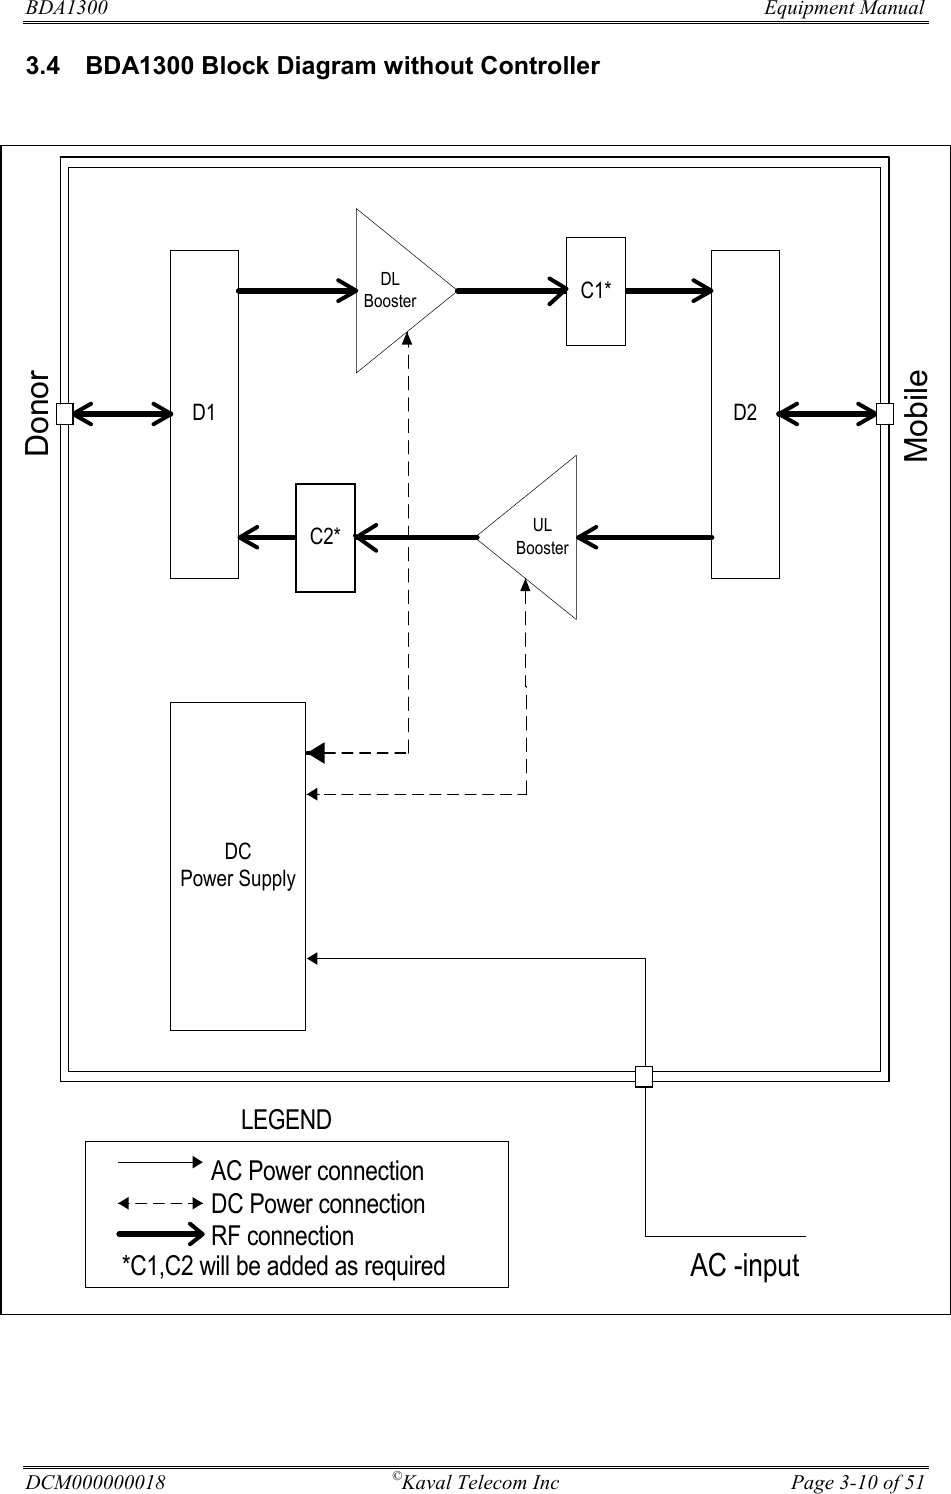 BDA1300              Equipment Manual DCM000000018 ©Kaval Telecom Inc  Page 3-10 of 51 3.4  BDA1300 Block Diagram without Controller D1 D2DLBoosterULBoosterDCPower SupplyLEGENDAC Power connectionDC Power connectionRF connectionDonorMobileAC -inputC1*C2**C1,C2 will be added as required